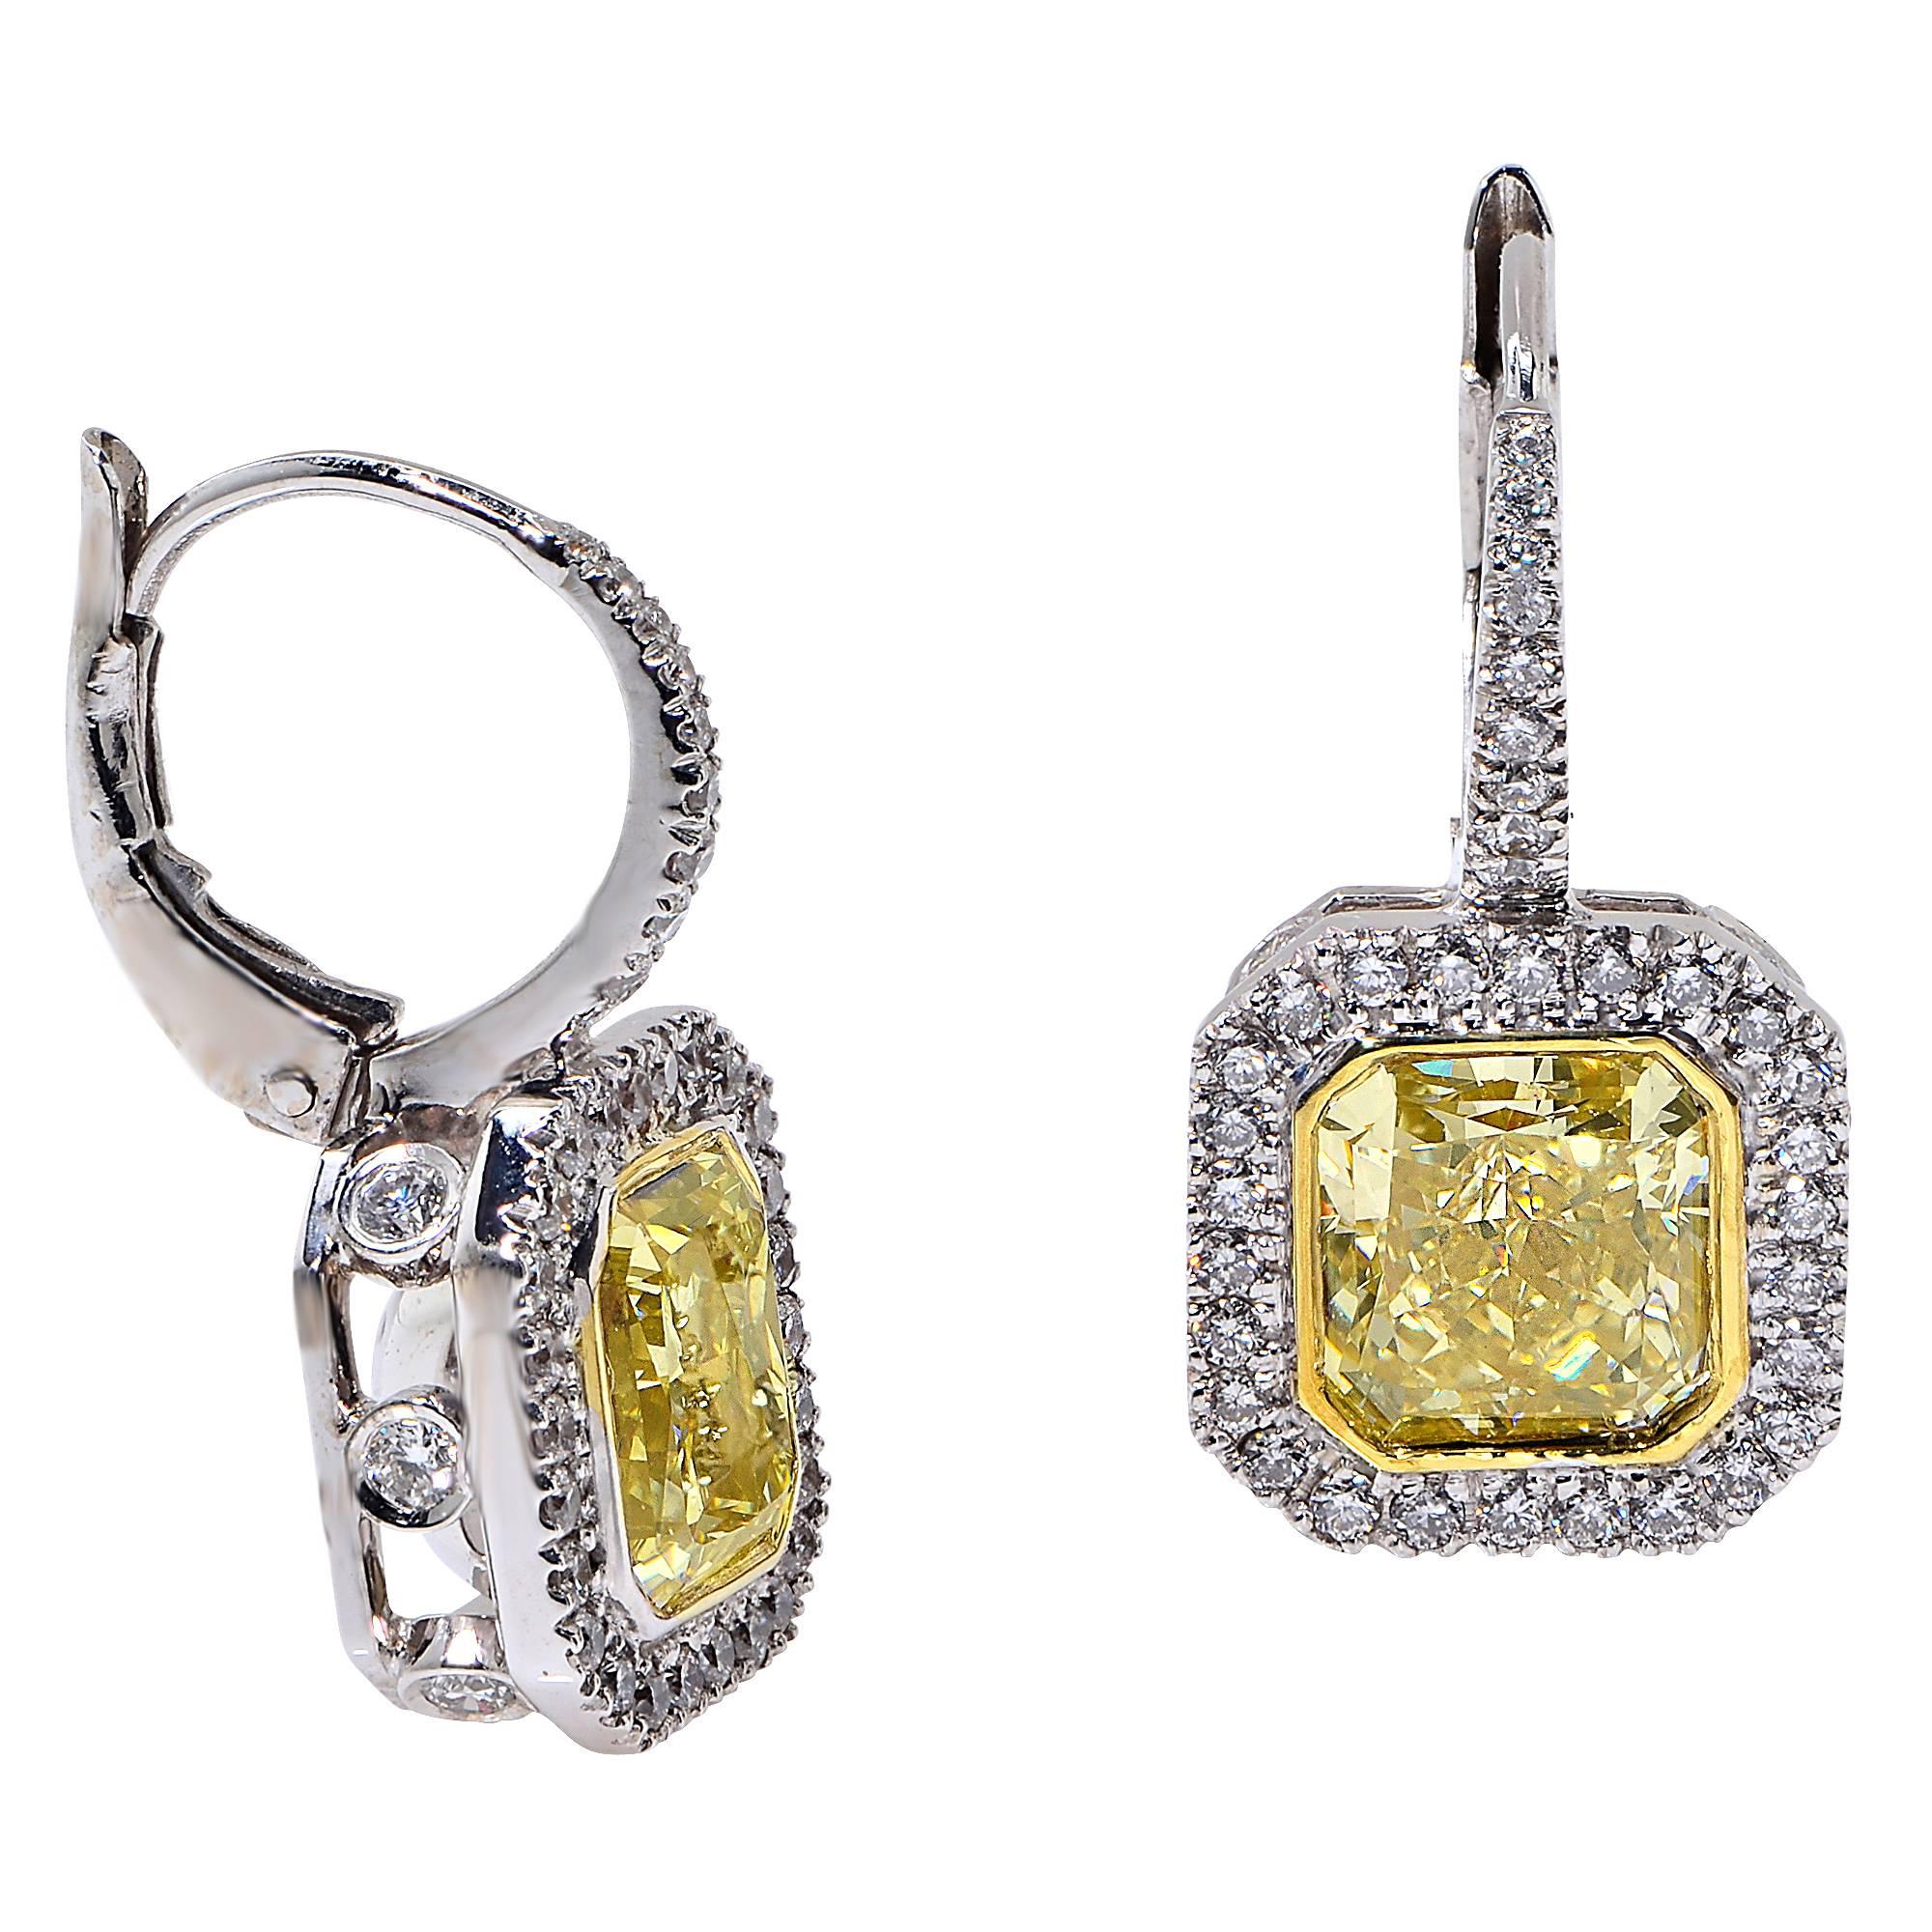 2.02 Carat Fancy Light Yellow, VS2 Clarity, GIA Graded Radiant Cut Diamond Matched with a 1.73 Carat Fancy Yellow, VS2 Clarity, GIA Graded Radiant Cut Diamond Surrounded by 70 Round Brilliant Cut Diamonds Weighing .85 Carats, F Color, VS Clarity,